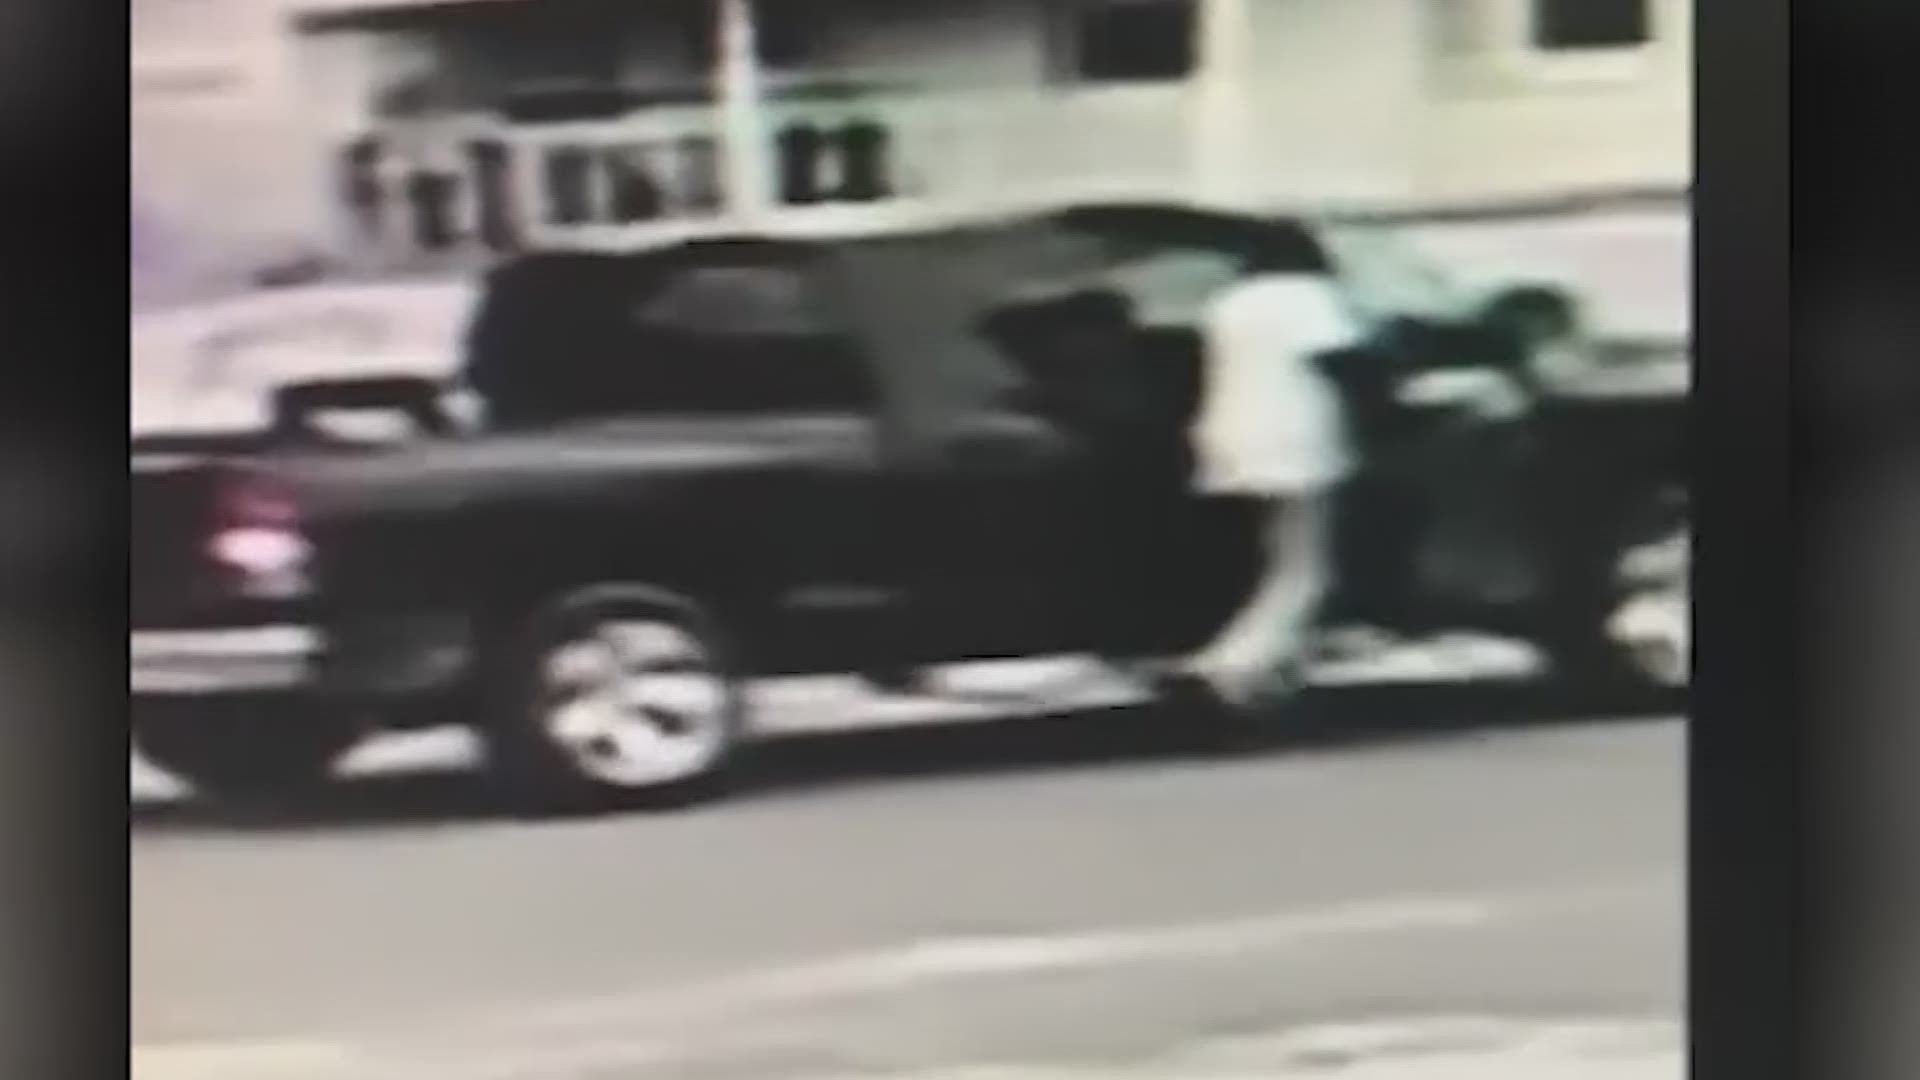 Anyone with information on the subjects in the video or the vehicle are asked to call NOPD 4th District at 504-658-6040, 504-658-6045 or Crimestoppers at 504-822-1111